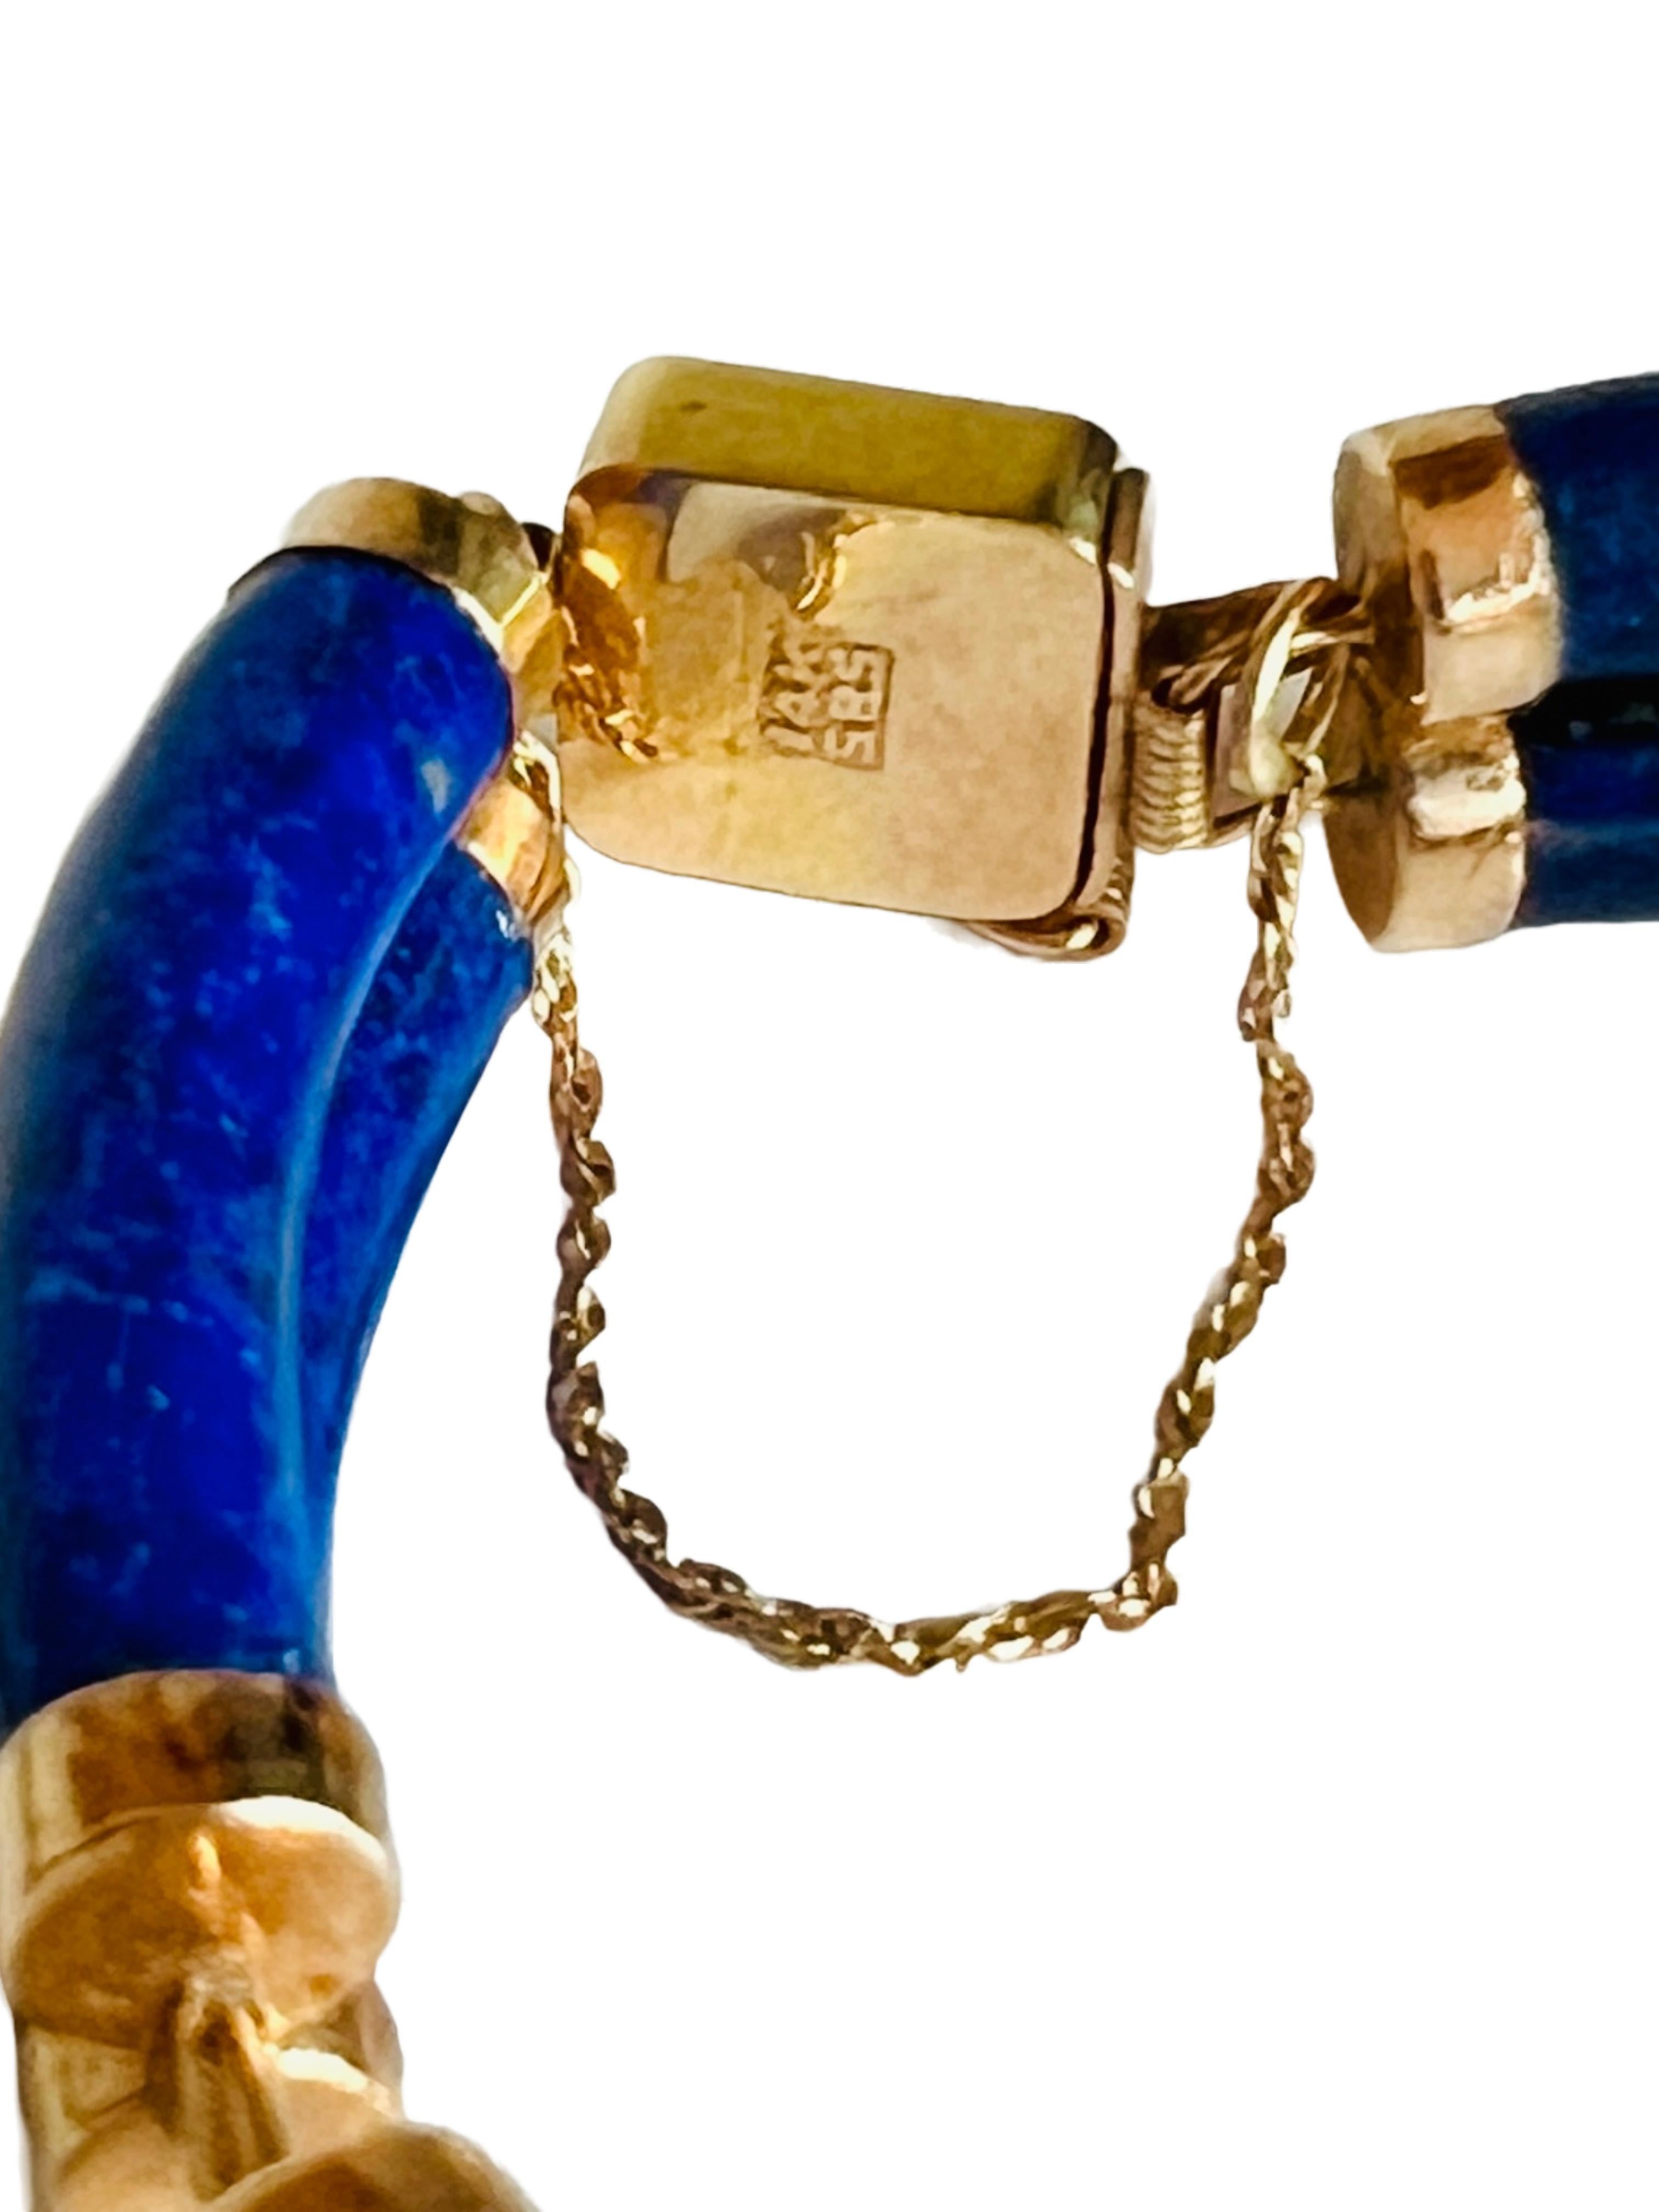 Vintage 14k Lapis Lazuli Two Bar Link Station Bracelet Chinese Good Luck Fortune In Good Condition For Sale In Sausalito, CA